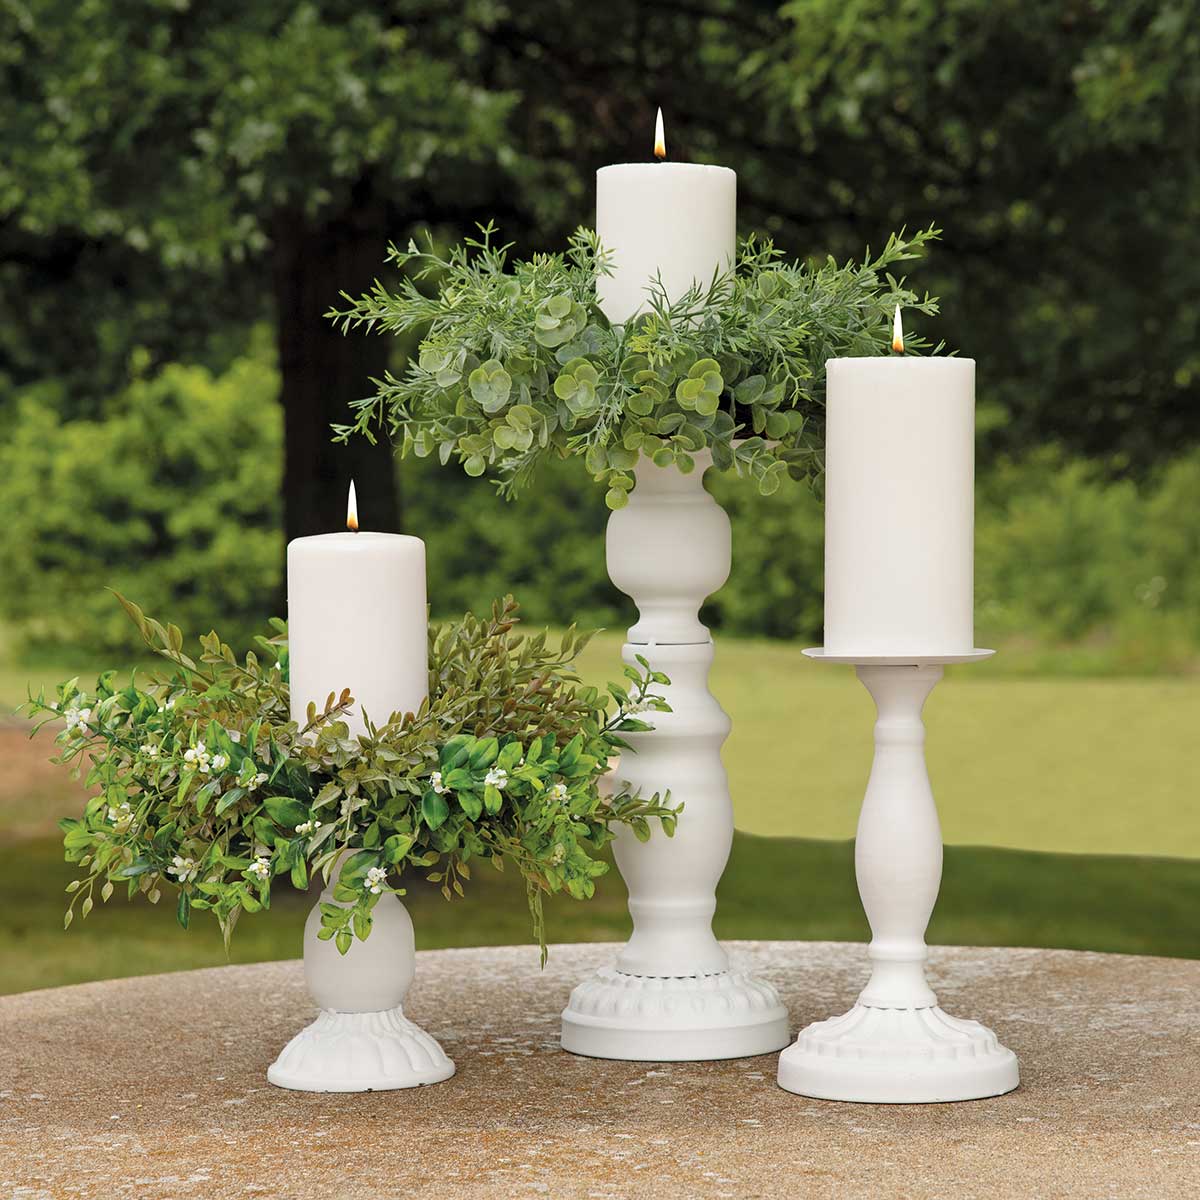 CANDLEHOLDER SMALL 3.5IN X 5.5IN MATTE WHITE METAL